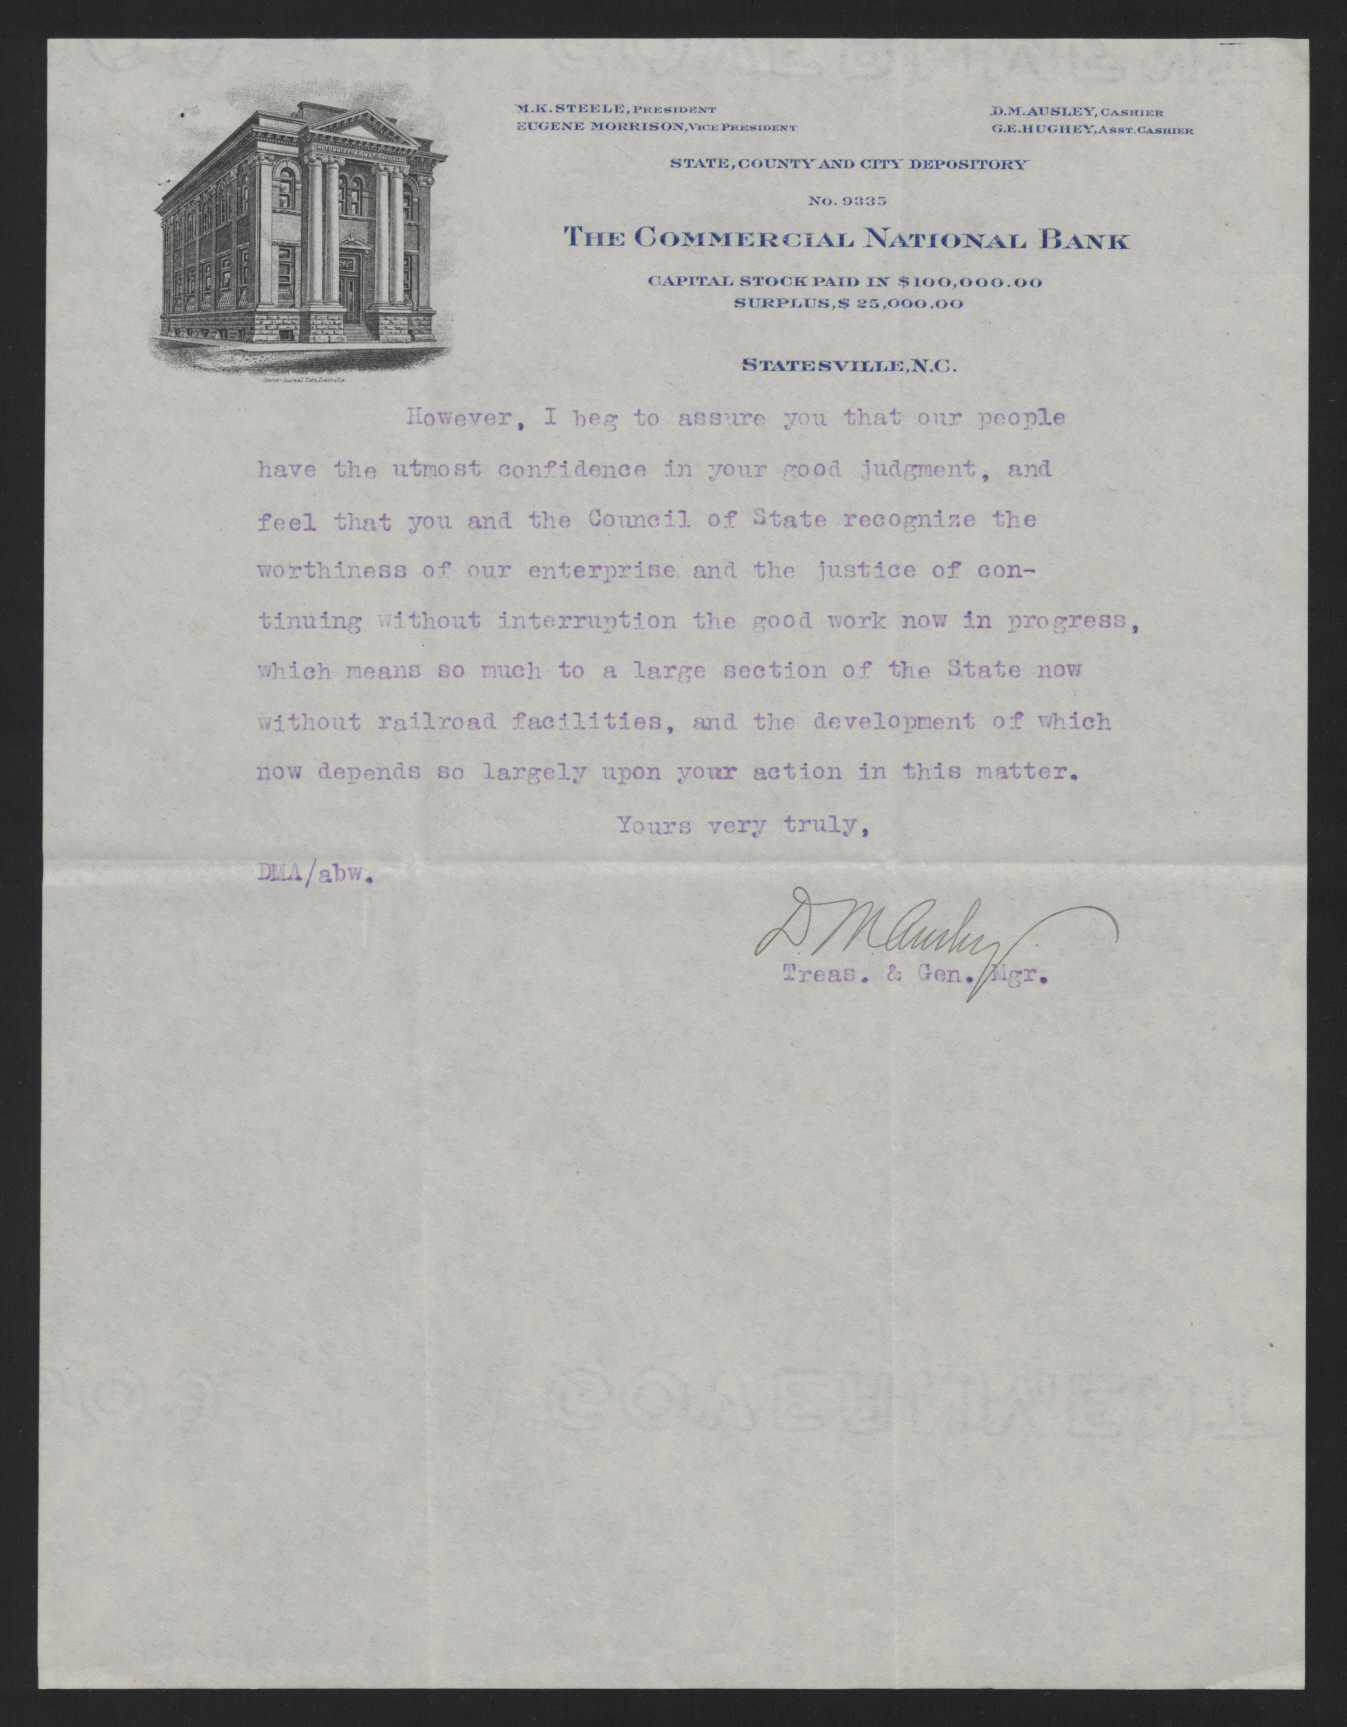 Letter from Ausley to Craig, July 11, 1913, page 2